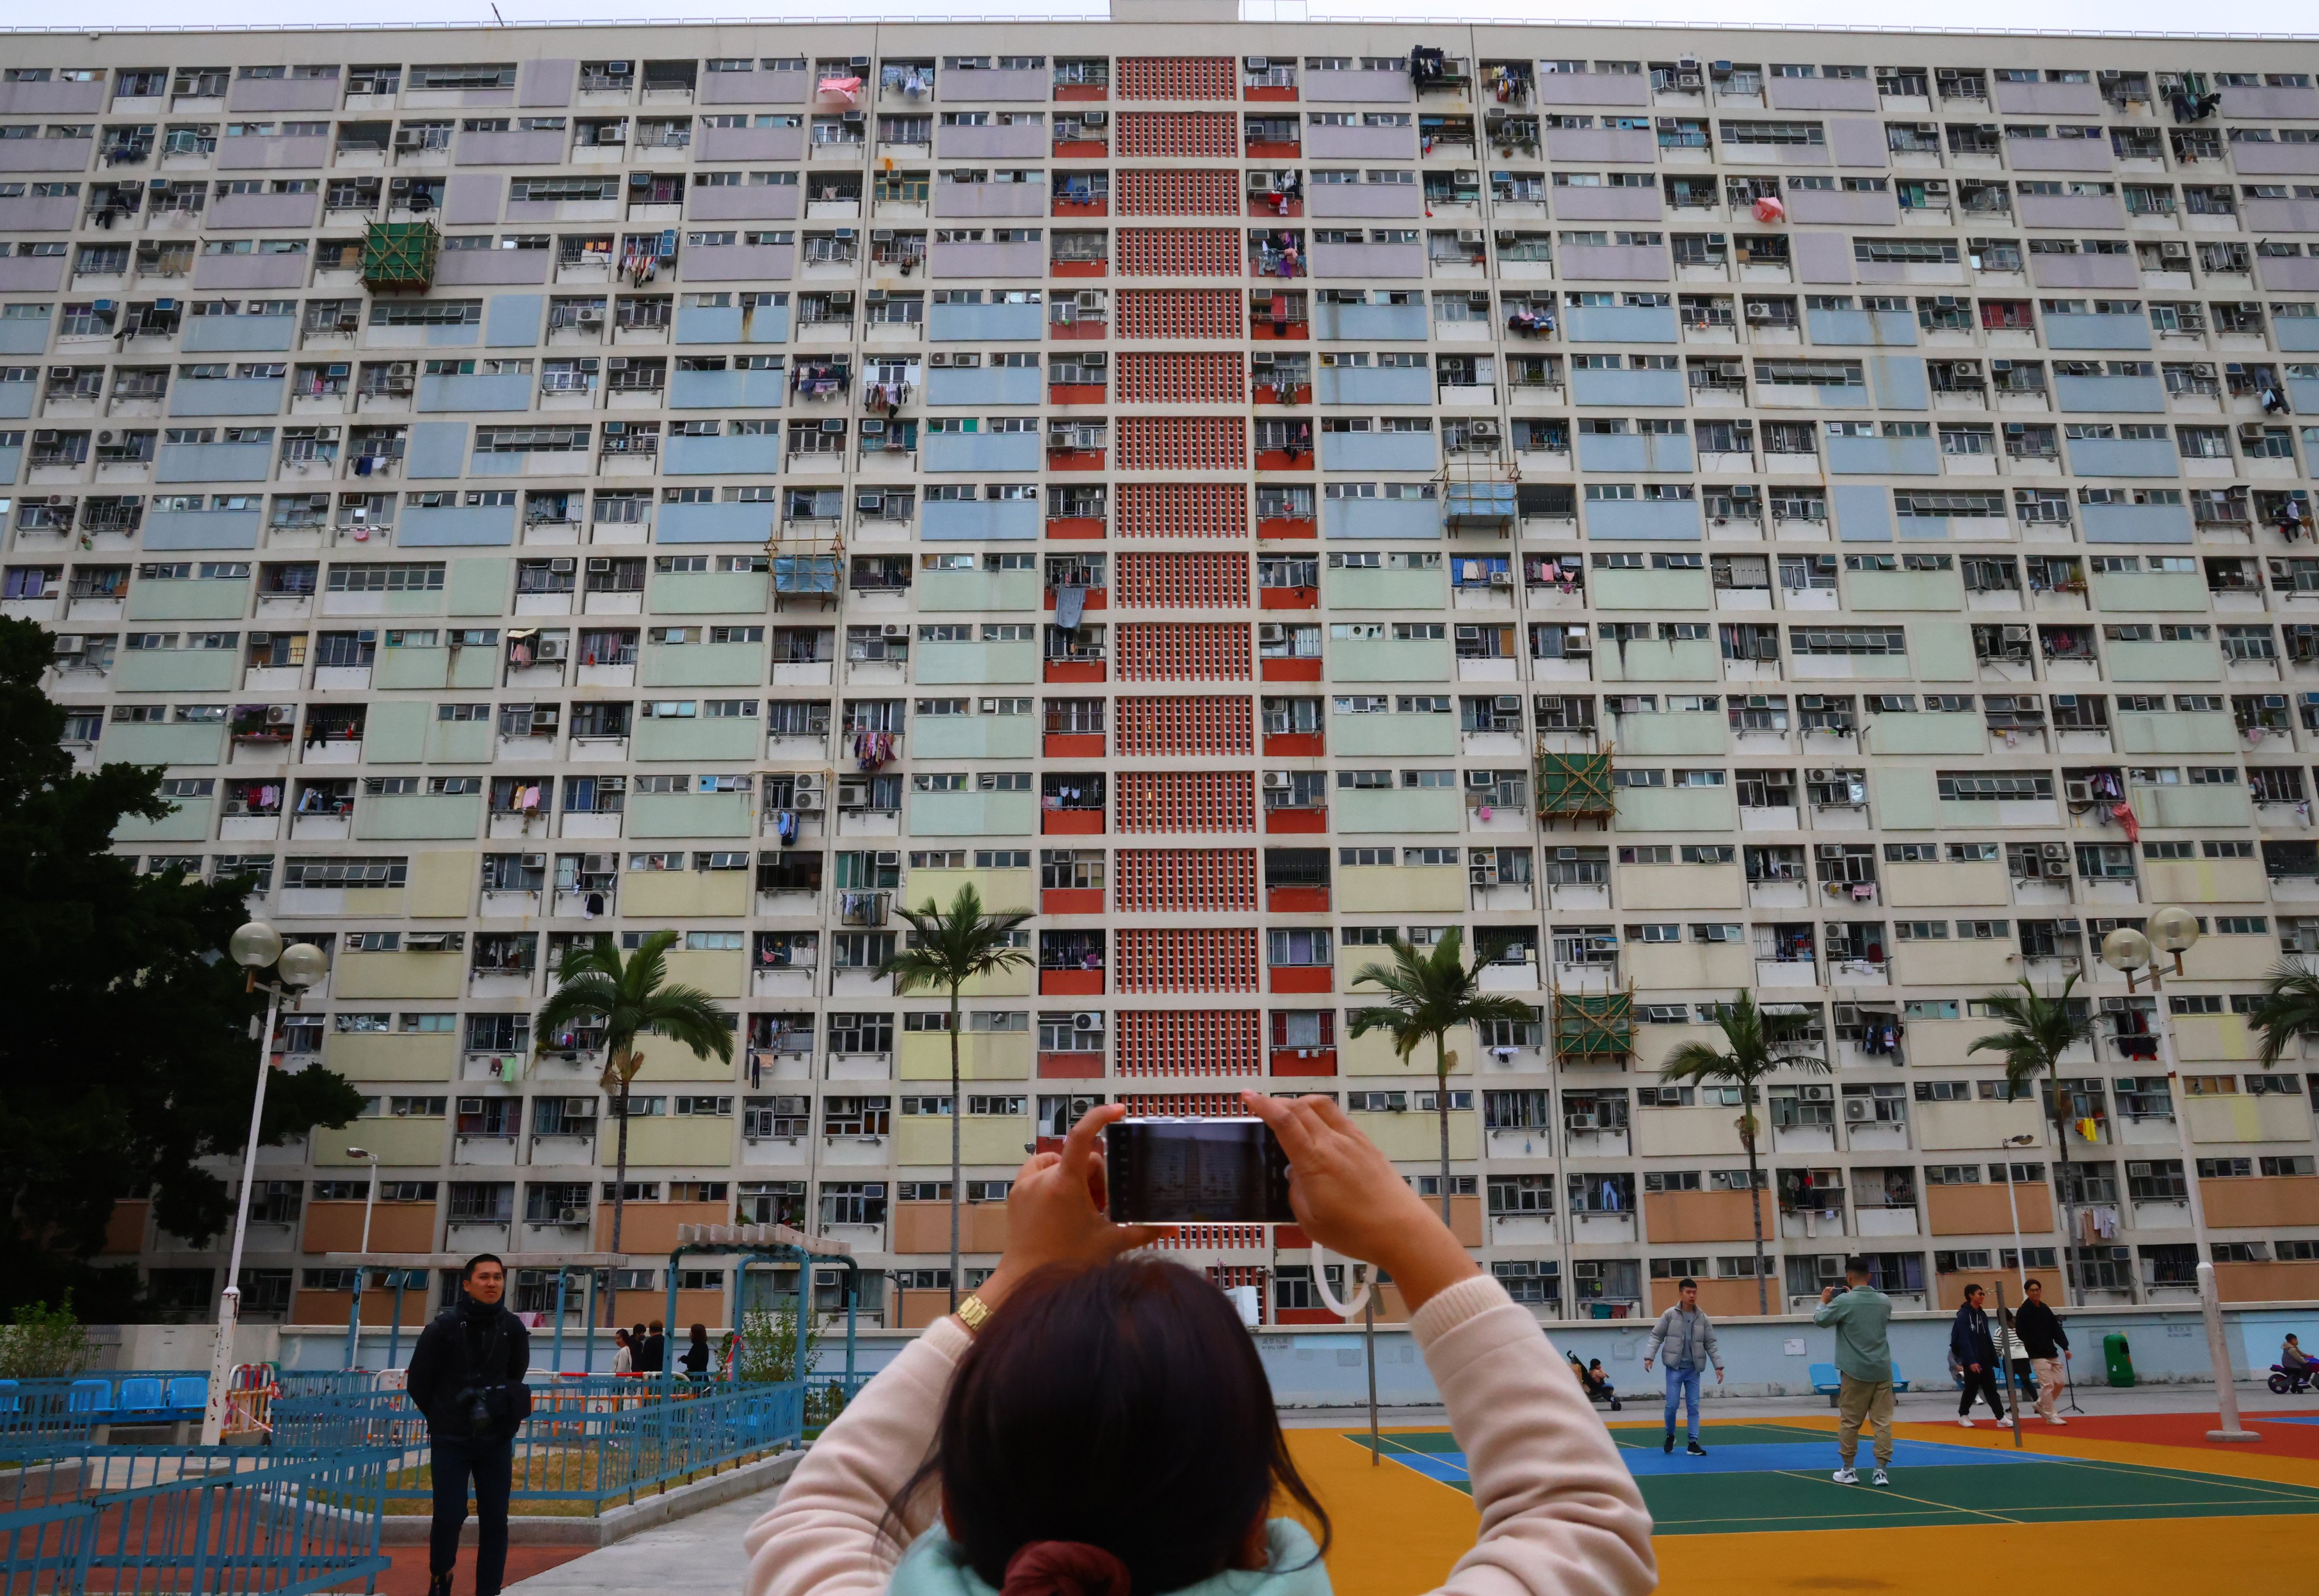 Choi Hung Estate’s multi-coloured housing blocks are  popular for pictures to post on social media. Photo: Dickson Lee